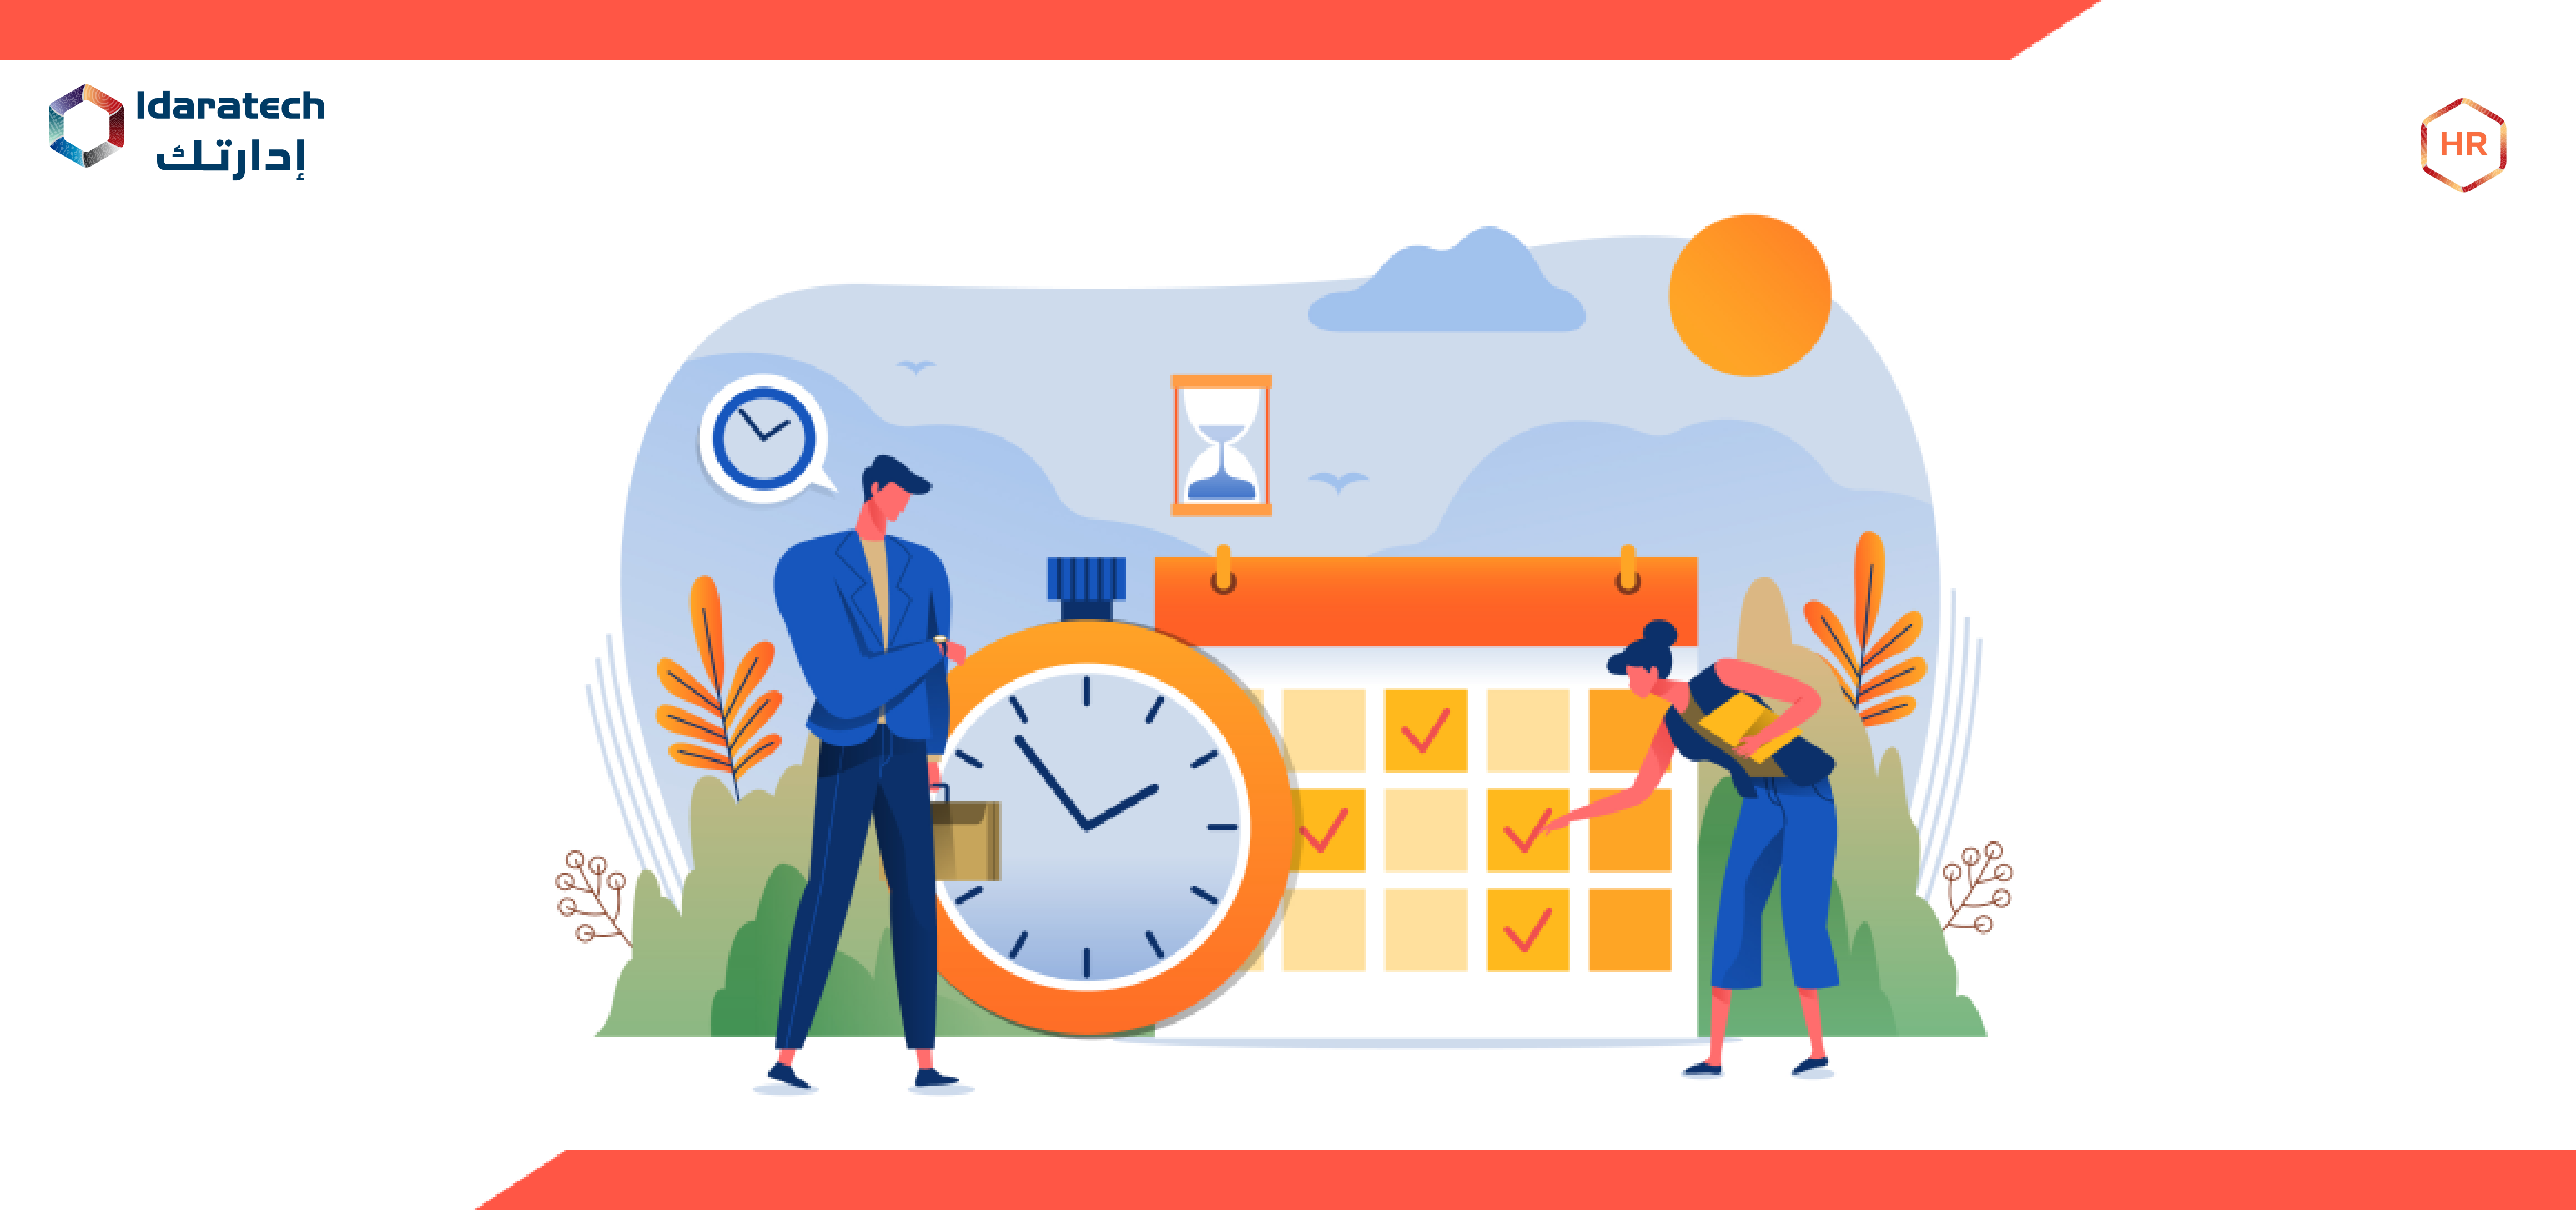 How to Use Idaratech hr
for Employee Scheduling